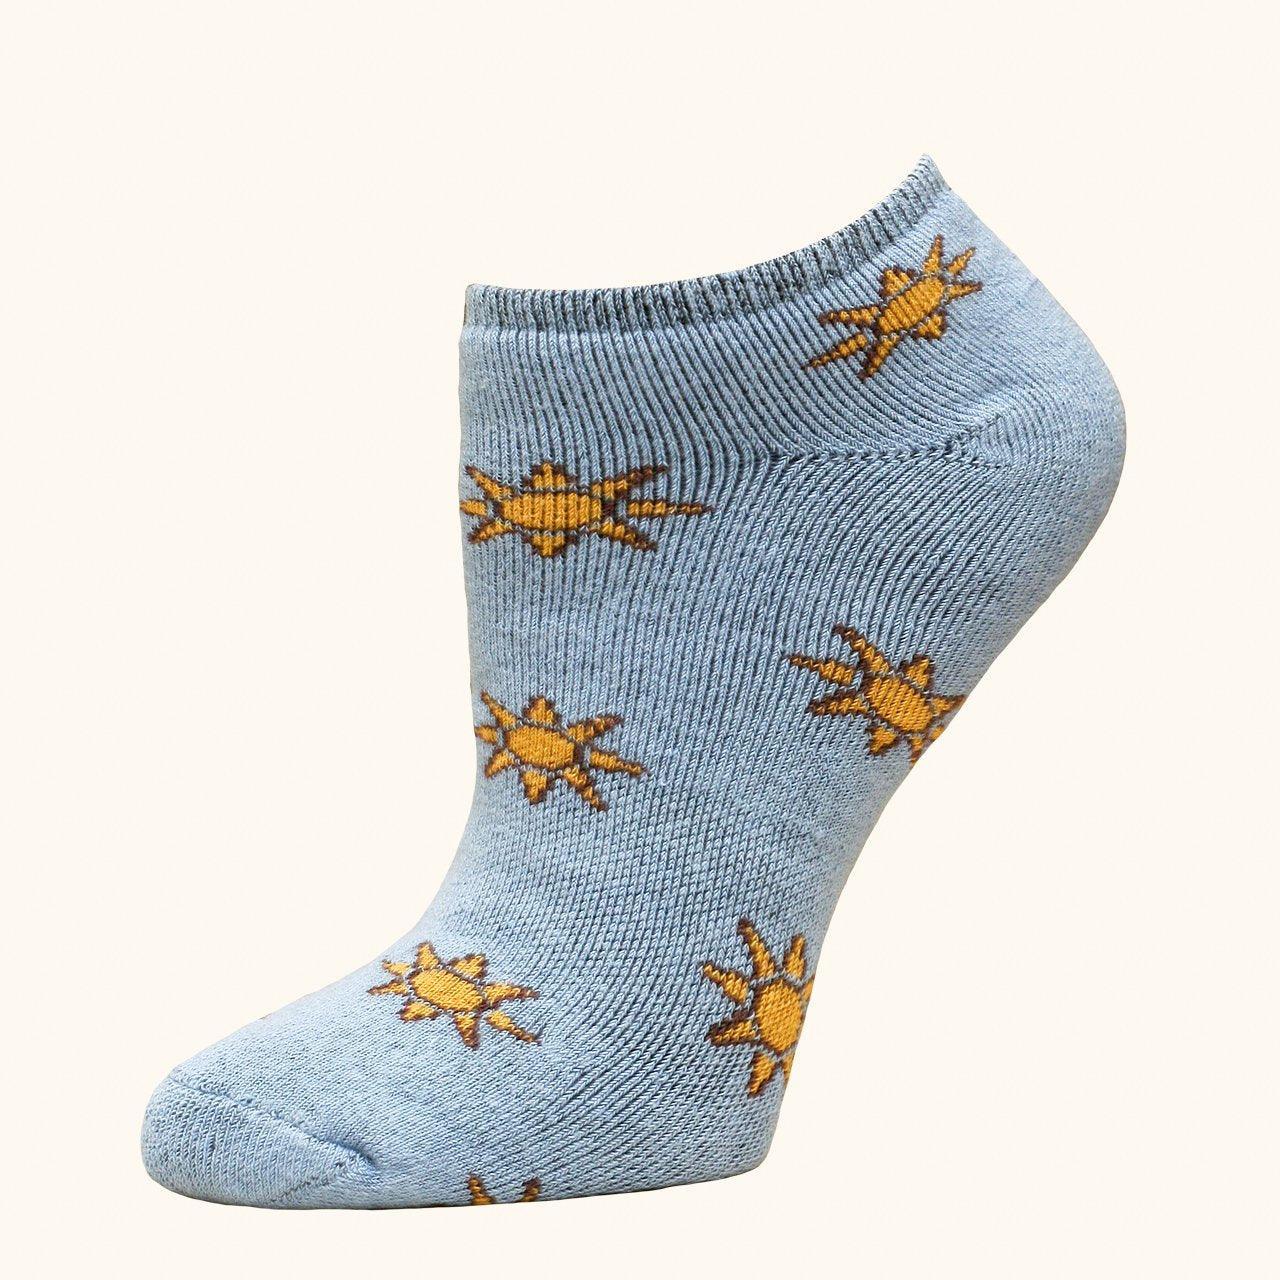 Patterned Footie, 81.6% Organic Cotton, Ankle - Maggie's Organics - The Sock Monster